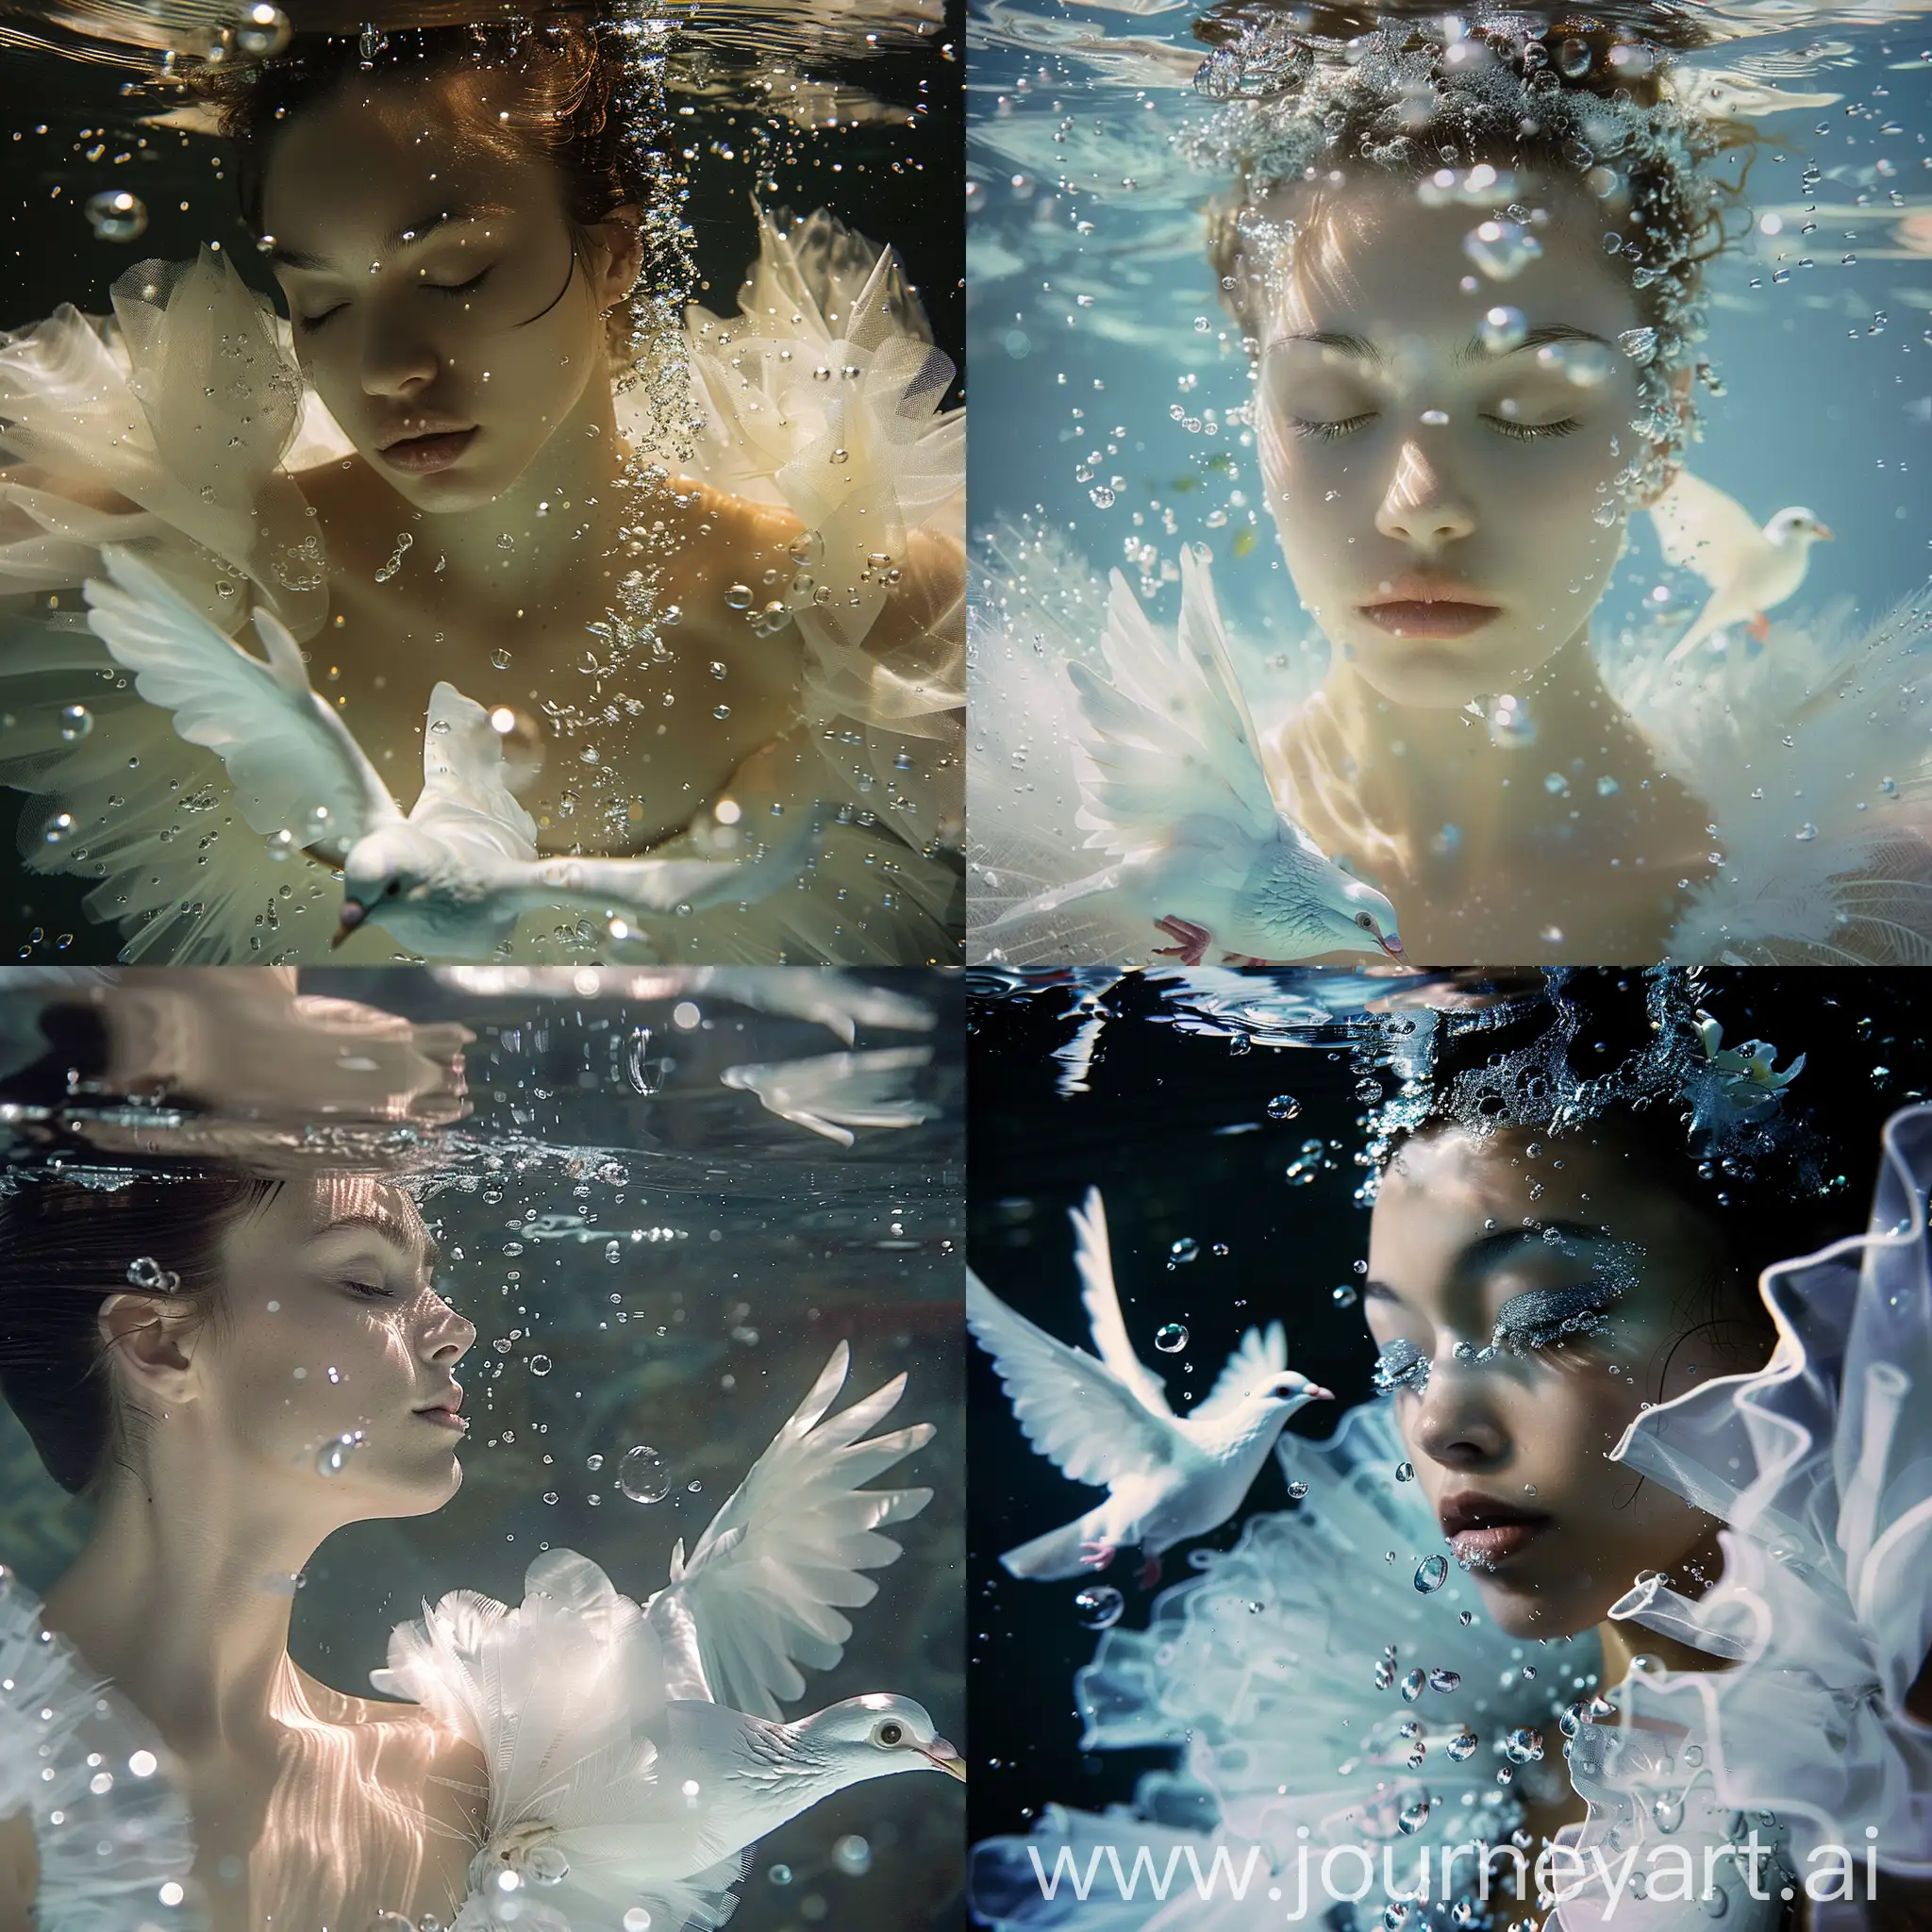 An image of a ballerina with eyes closed underwater with few bubbles, and a white dove swimming underwater with her dancing 